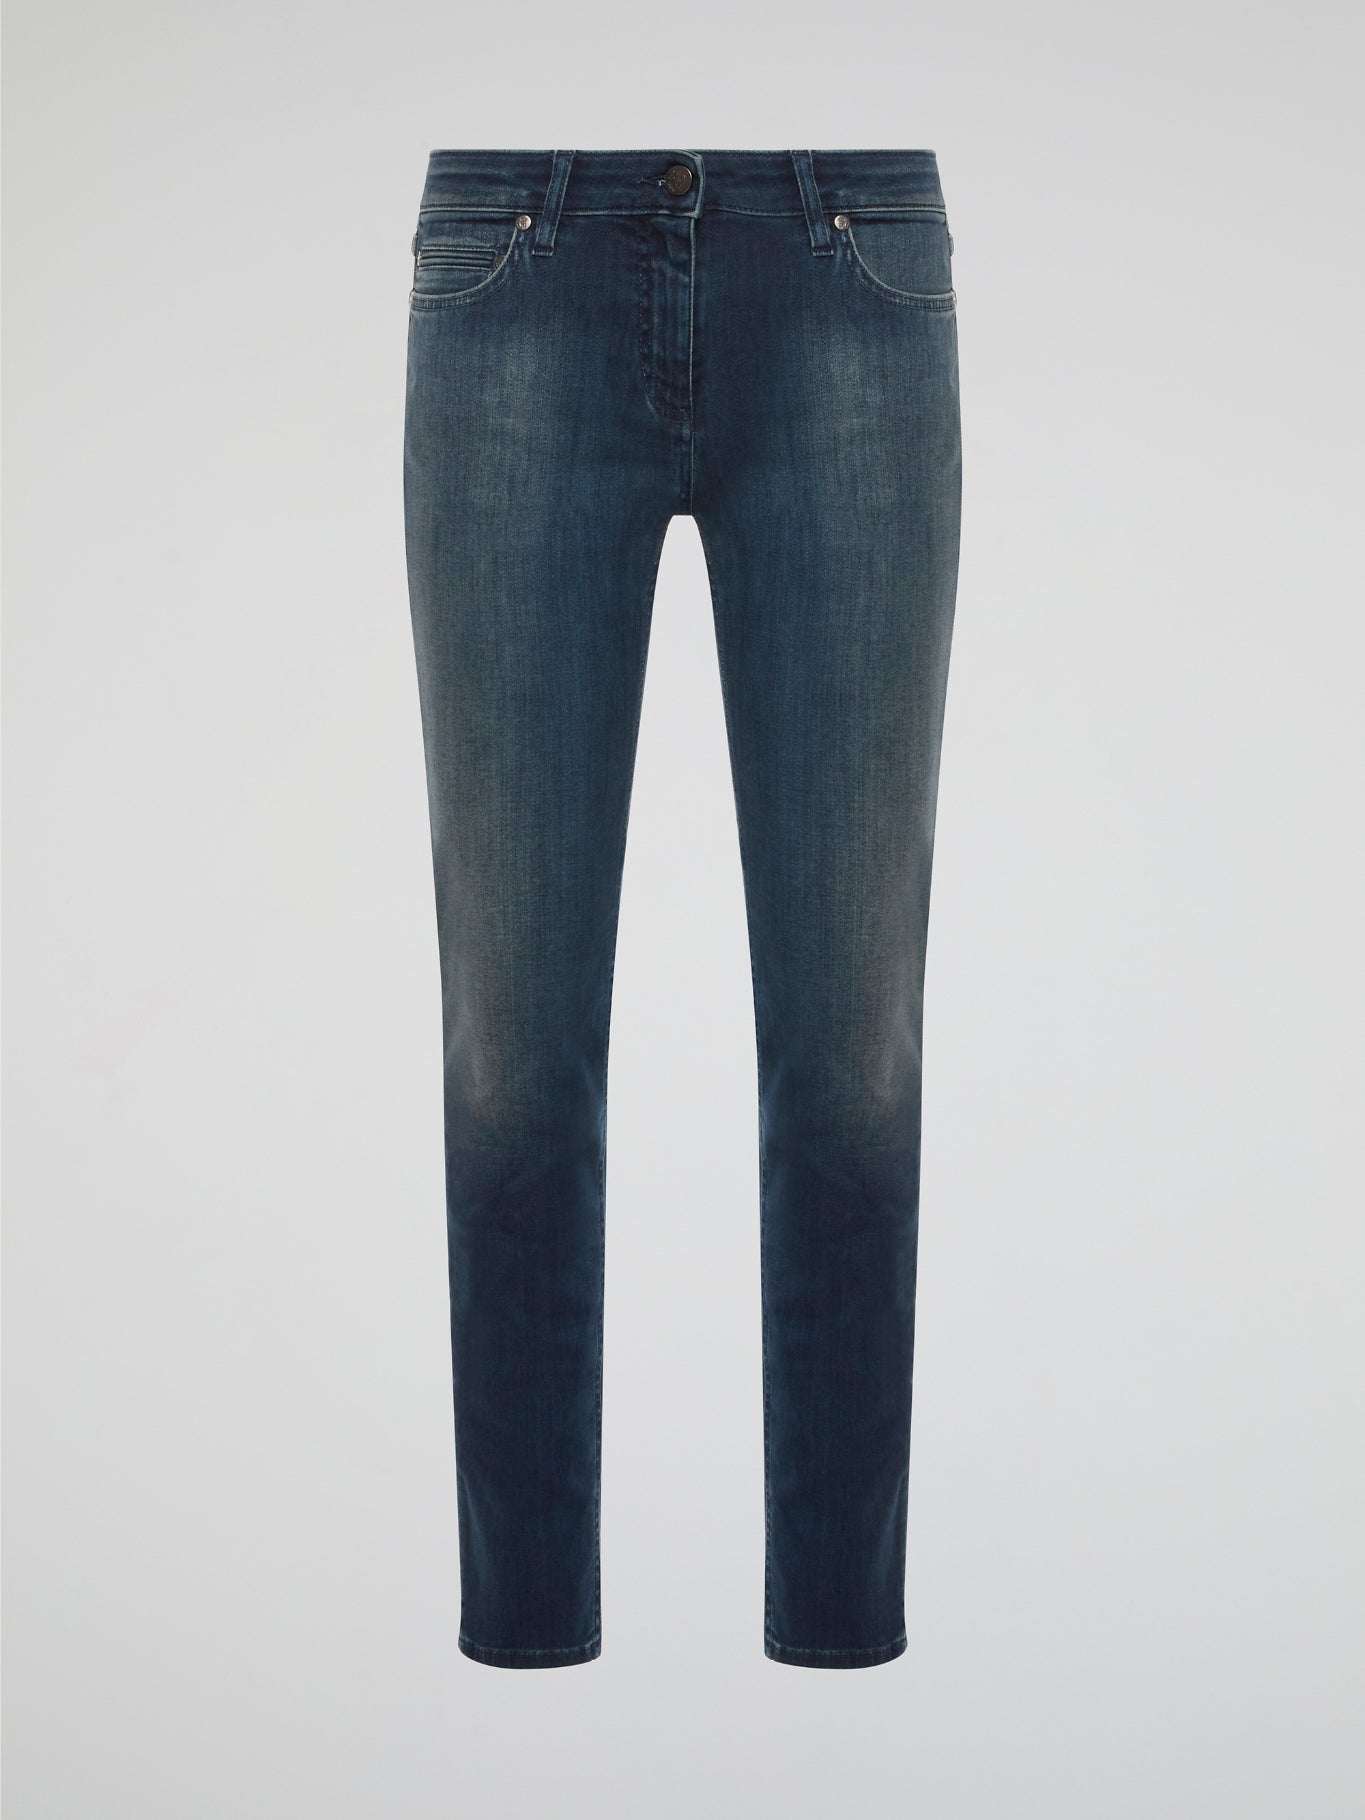 Elevate your denim game with these Stone Washed Skinny Denim Jeans by Roberto Cavalli, designed to hug your curves in all the right places. The unique stone wash finish gives these jeans a worn-in, vintage look that sets them apart from your average pair of skinny jeans. Pair them with a sleek blouse and heels for a chic and edgy urban look that will turn heads wherever you go.